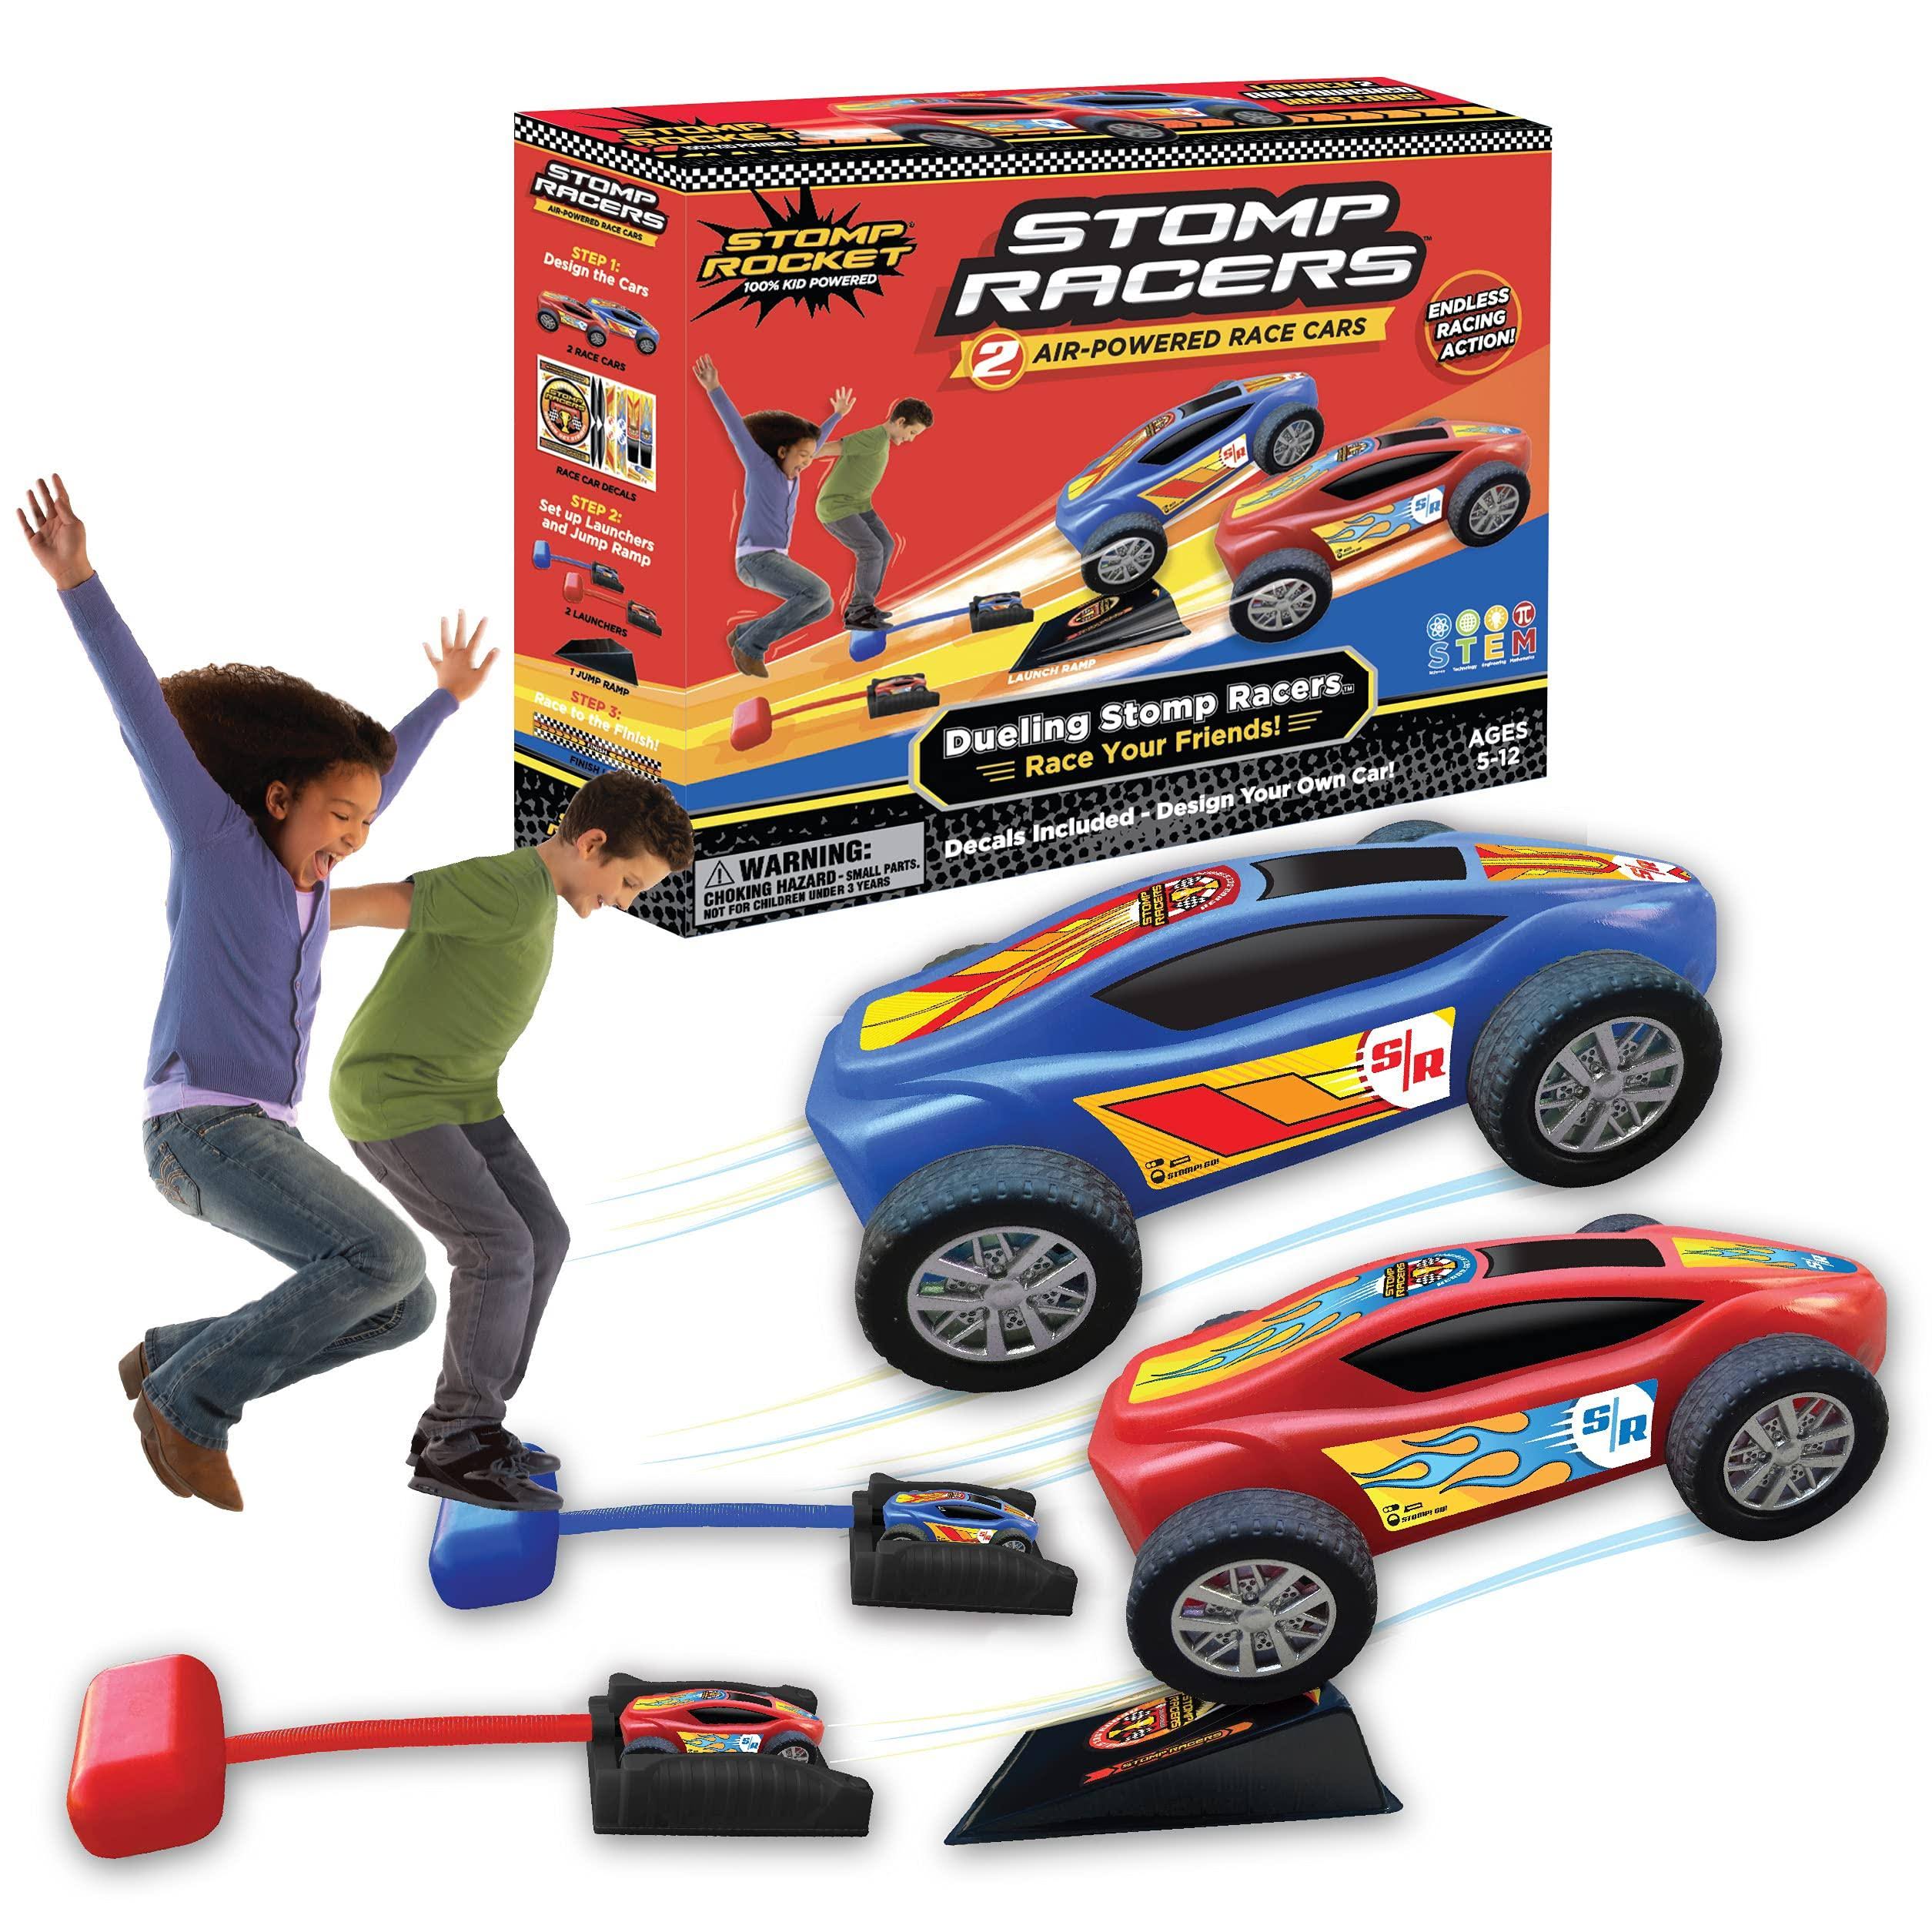 New Stomp Rocket Dueling Stomp Racers, 2 Toy Car Launchers and 2 Air P